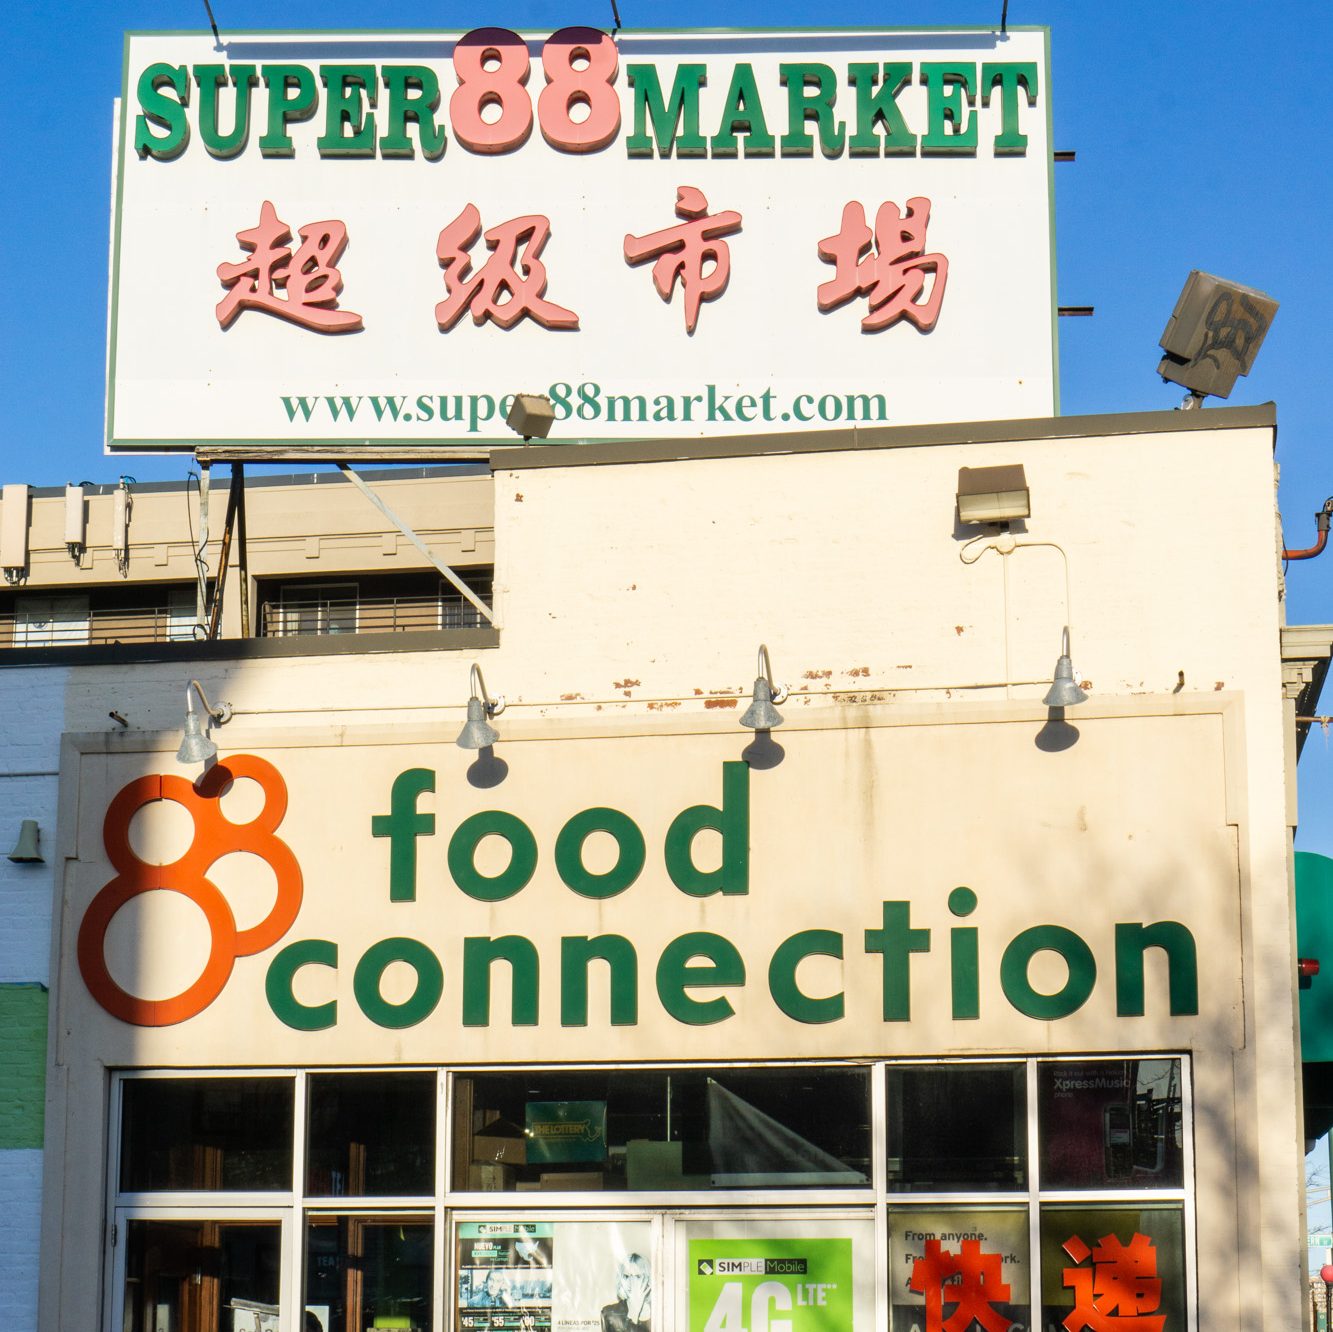 Super 88 Market's entrance, with a billboard that reads "Super 88 Market" and "Food Connection"